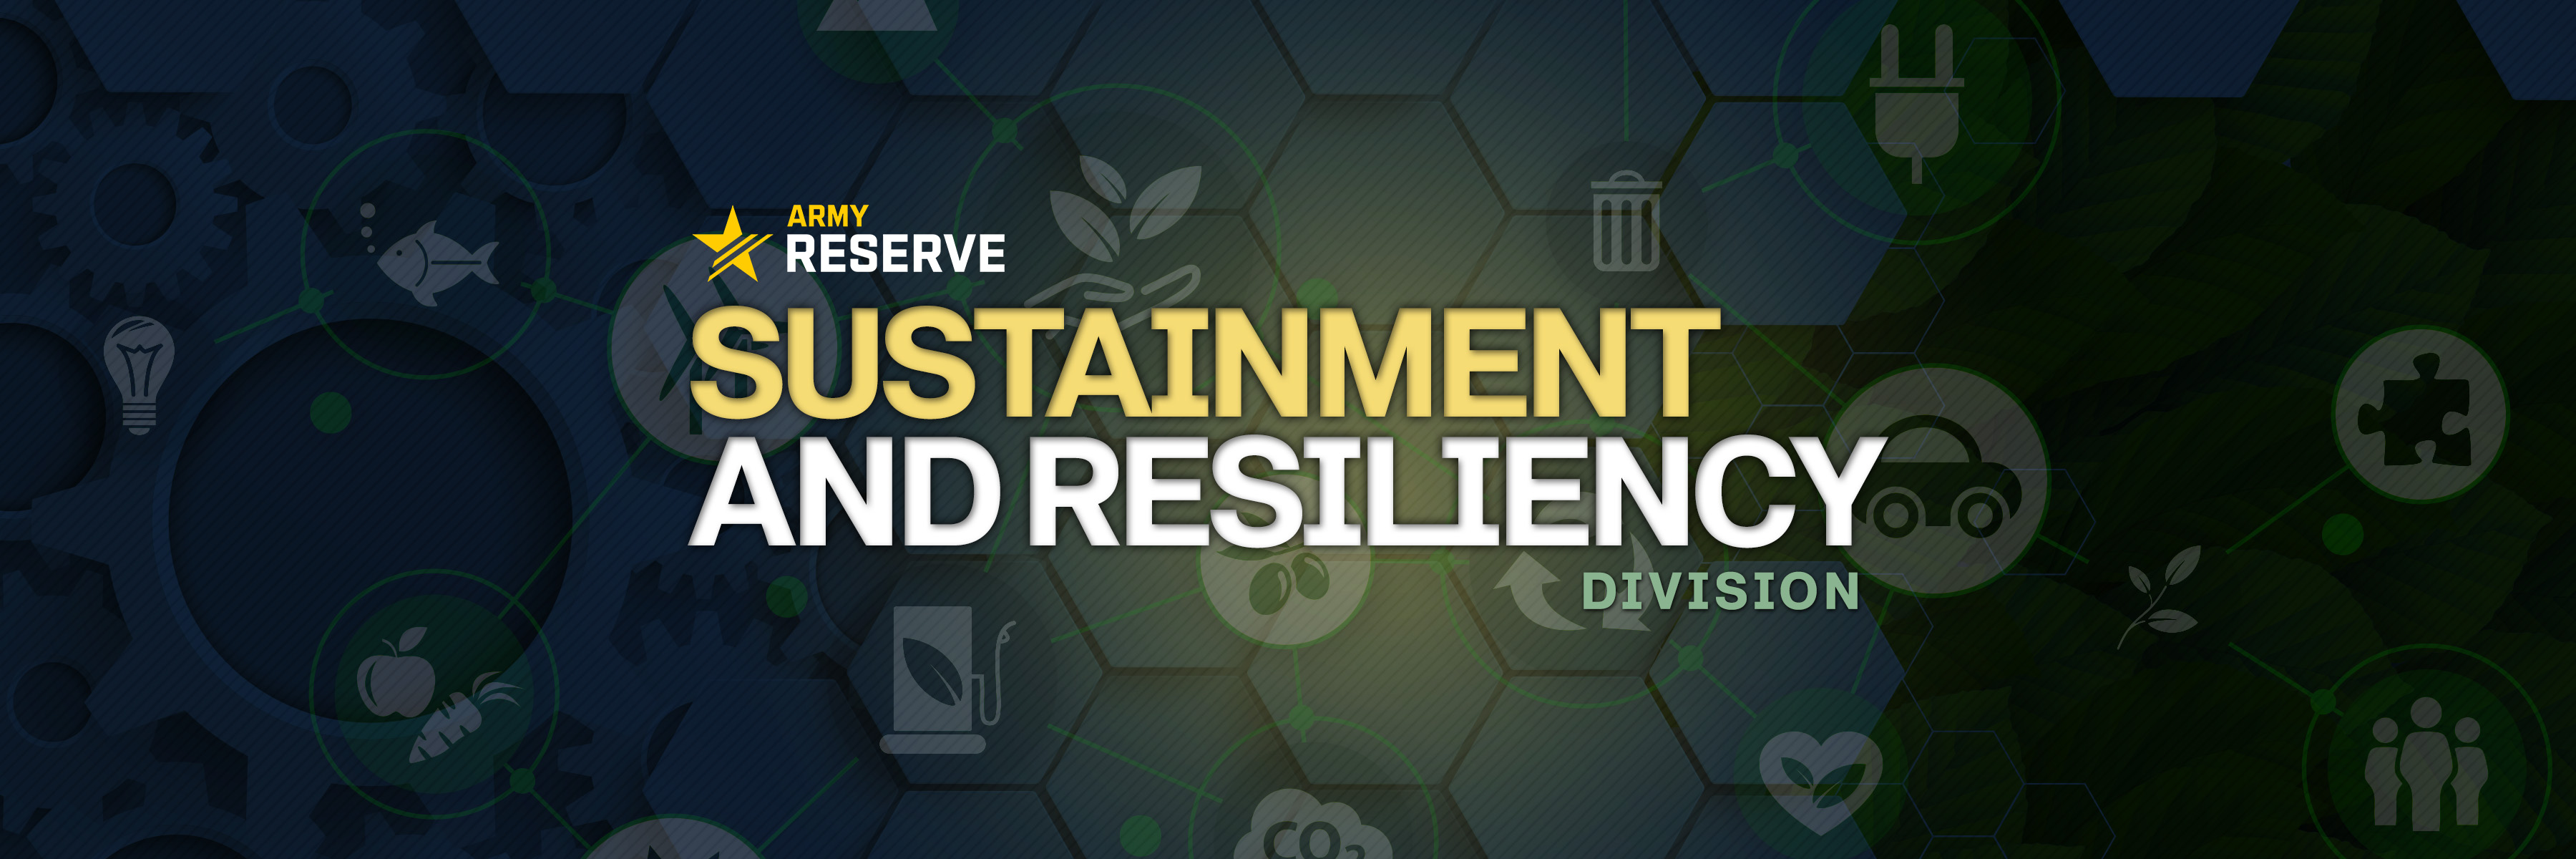 Army Reserve Sustainment and Resiliency Division